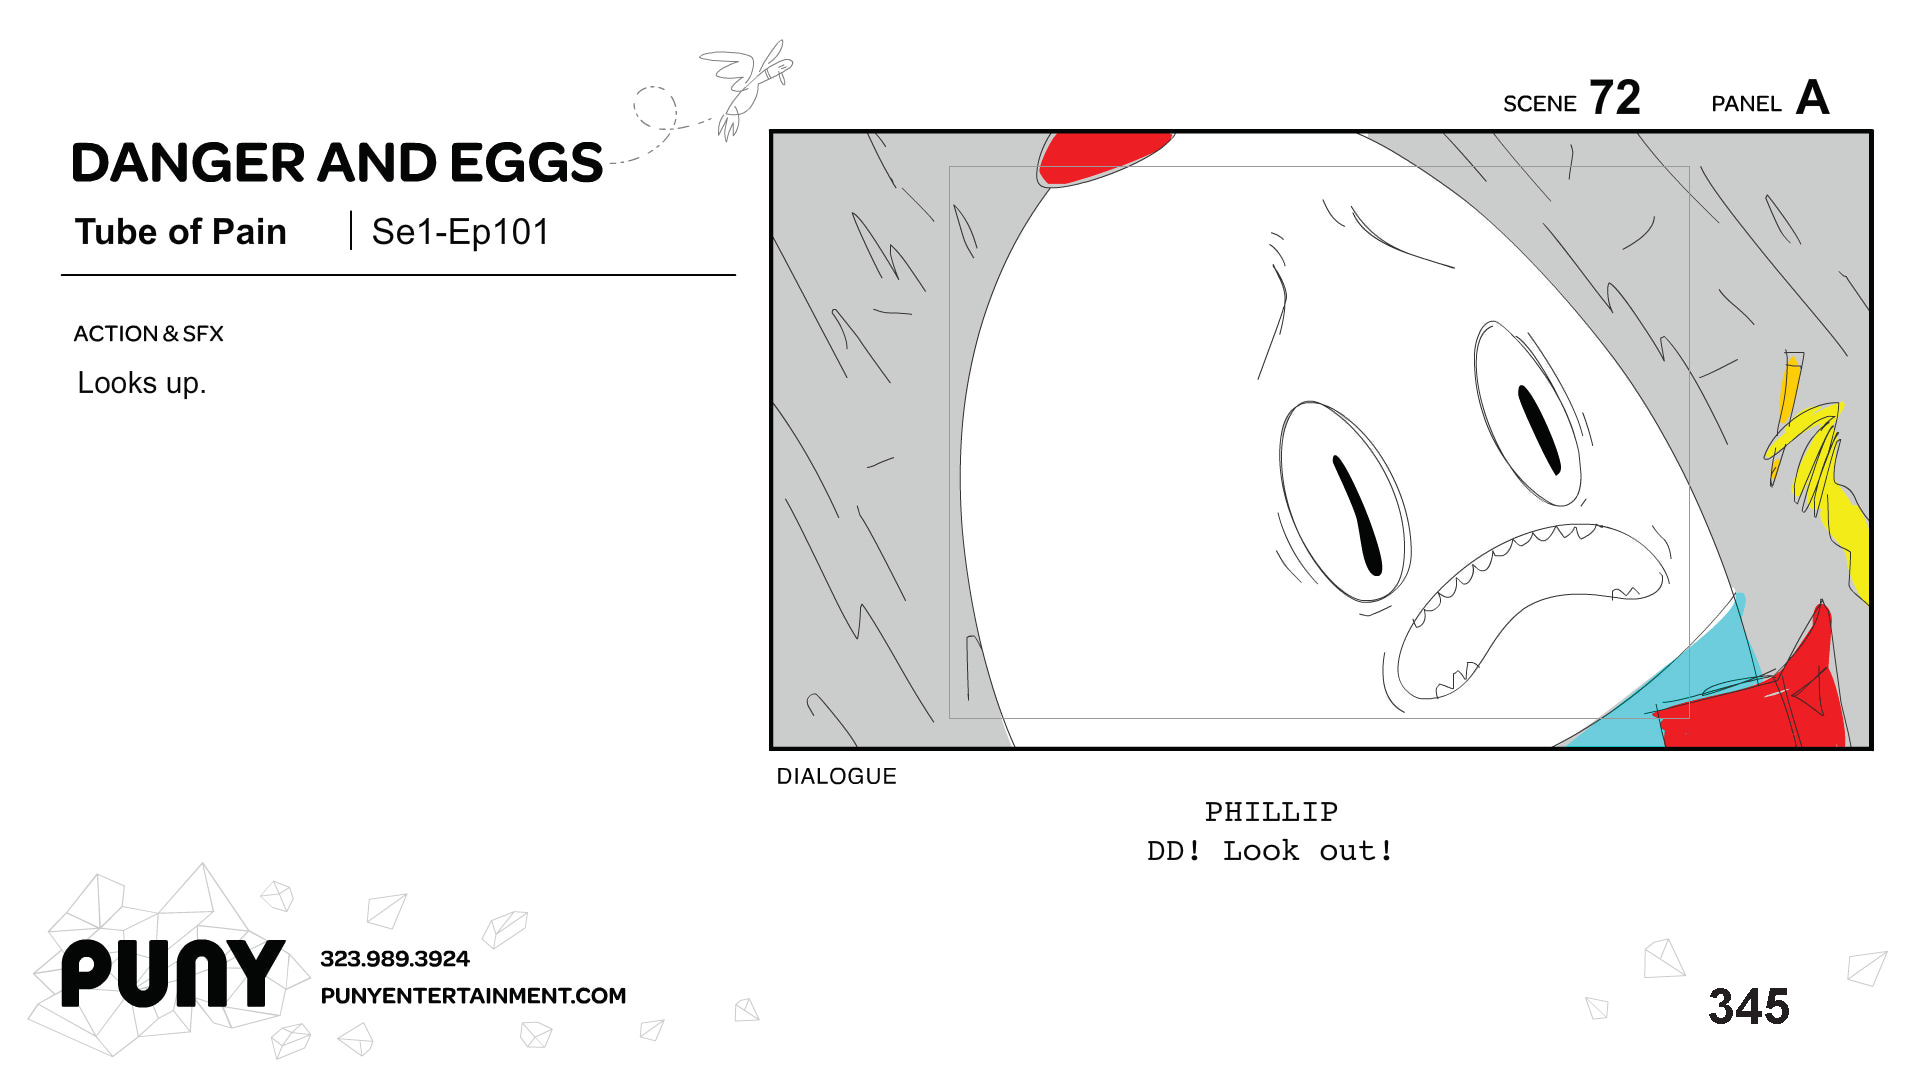 MikeOwens_STORYBOARDS_DangerAndEggs_Page_240.png